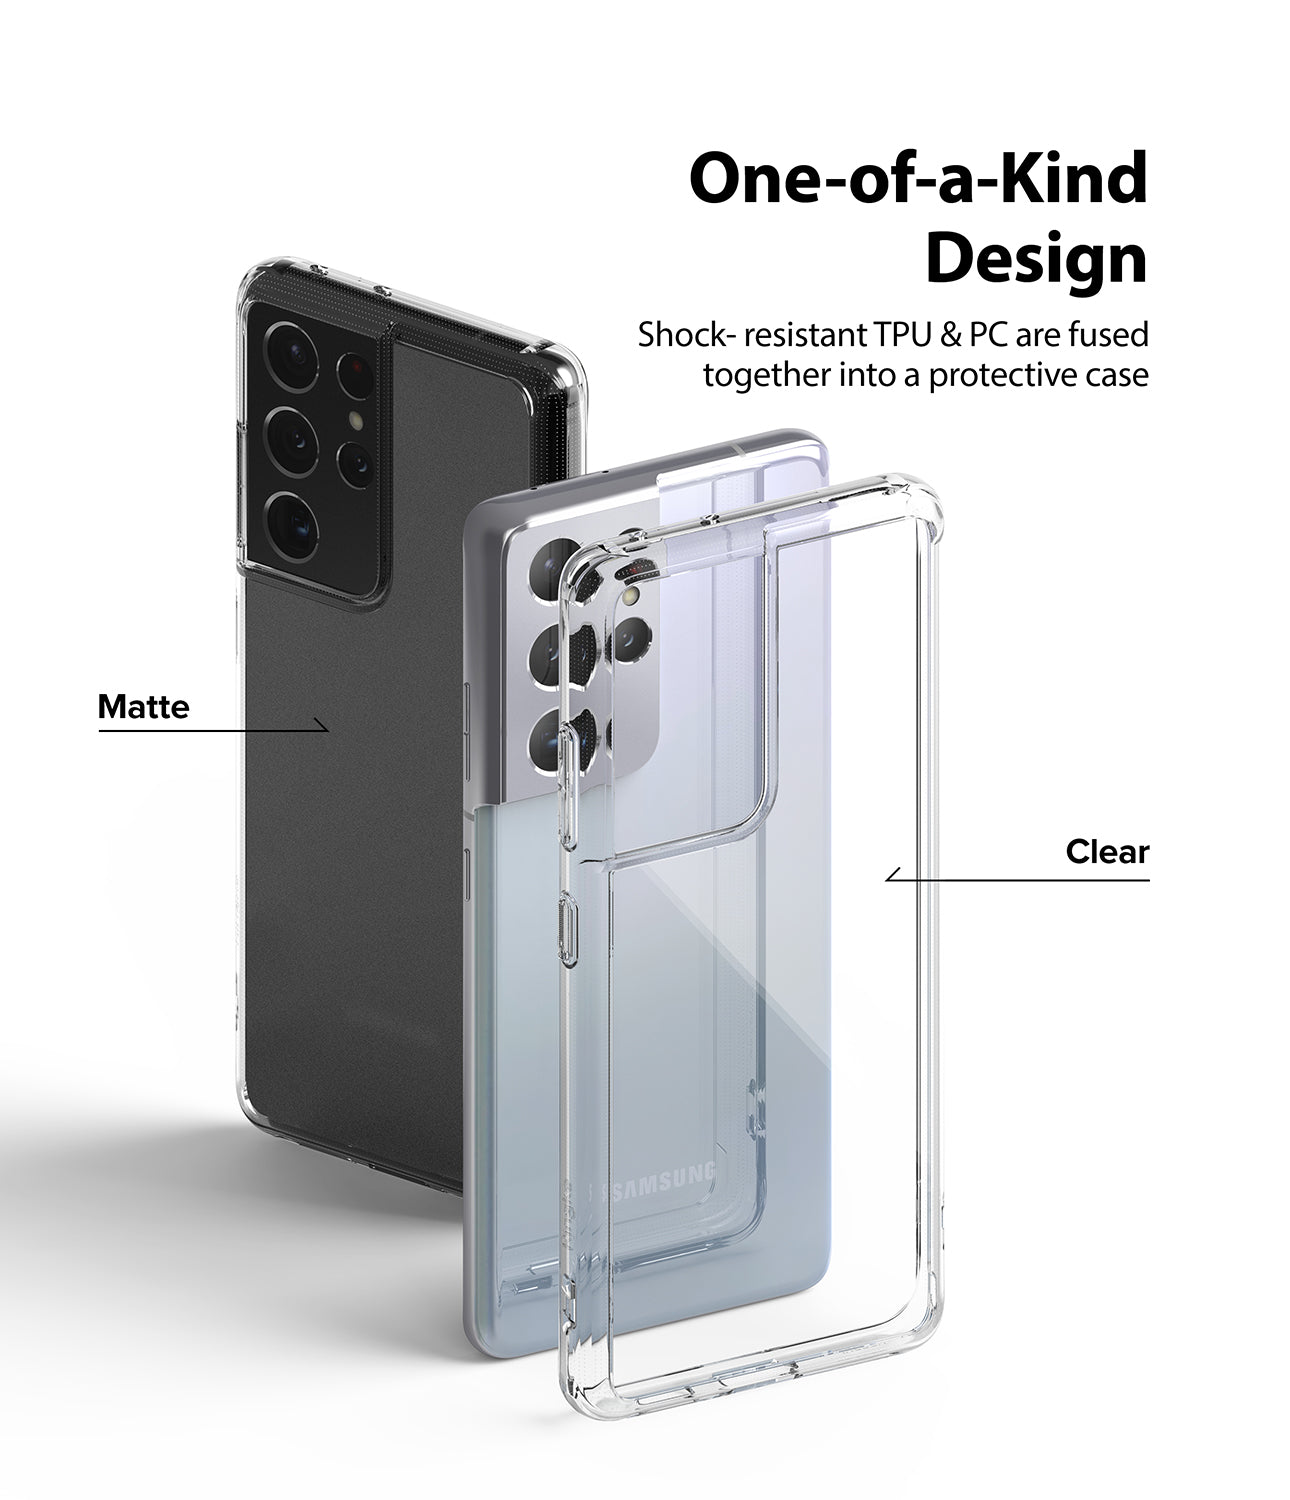 shock resistant TPU and PC are fused together into a protective case